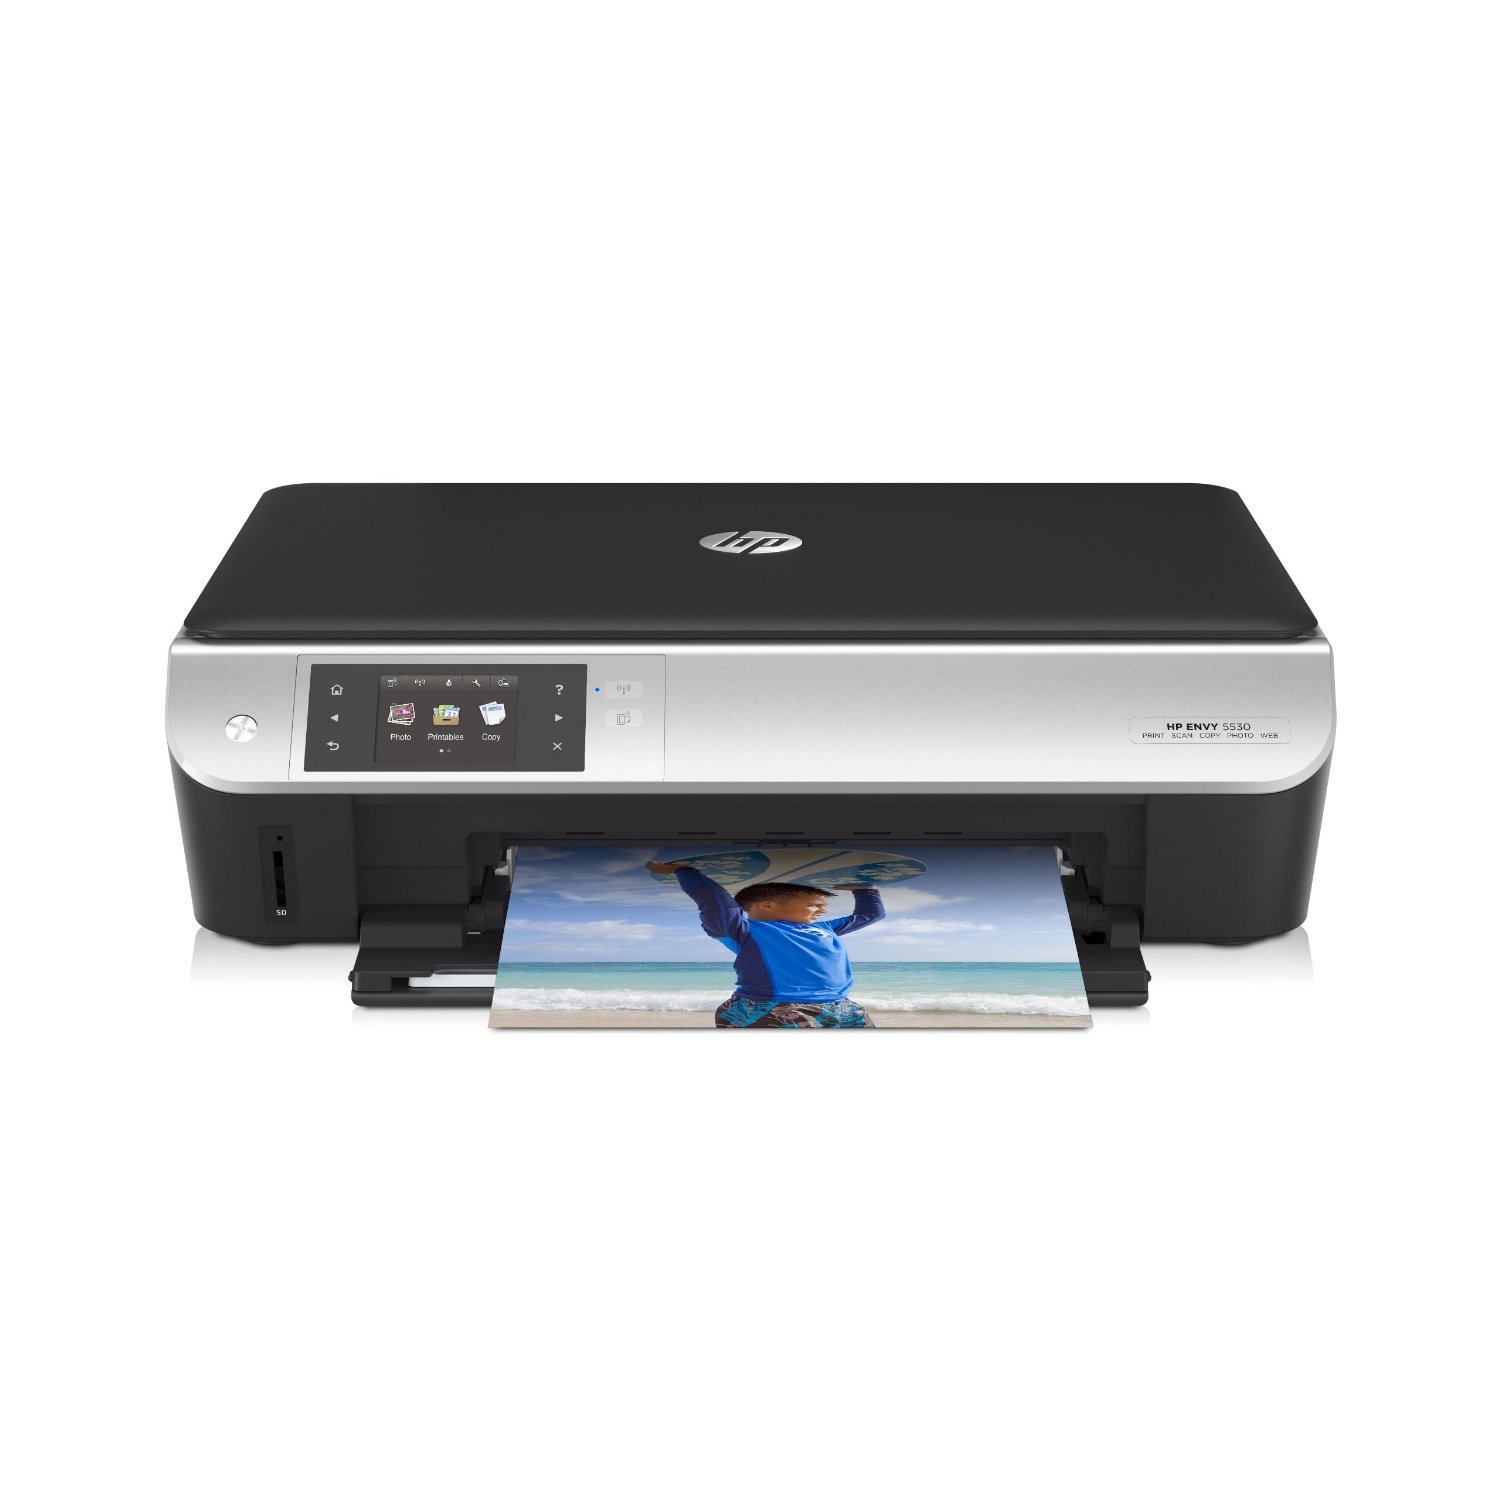 Hp Envy 5534 Wireless All In One Color Photo Printer Free Image Download 3216